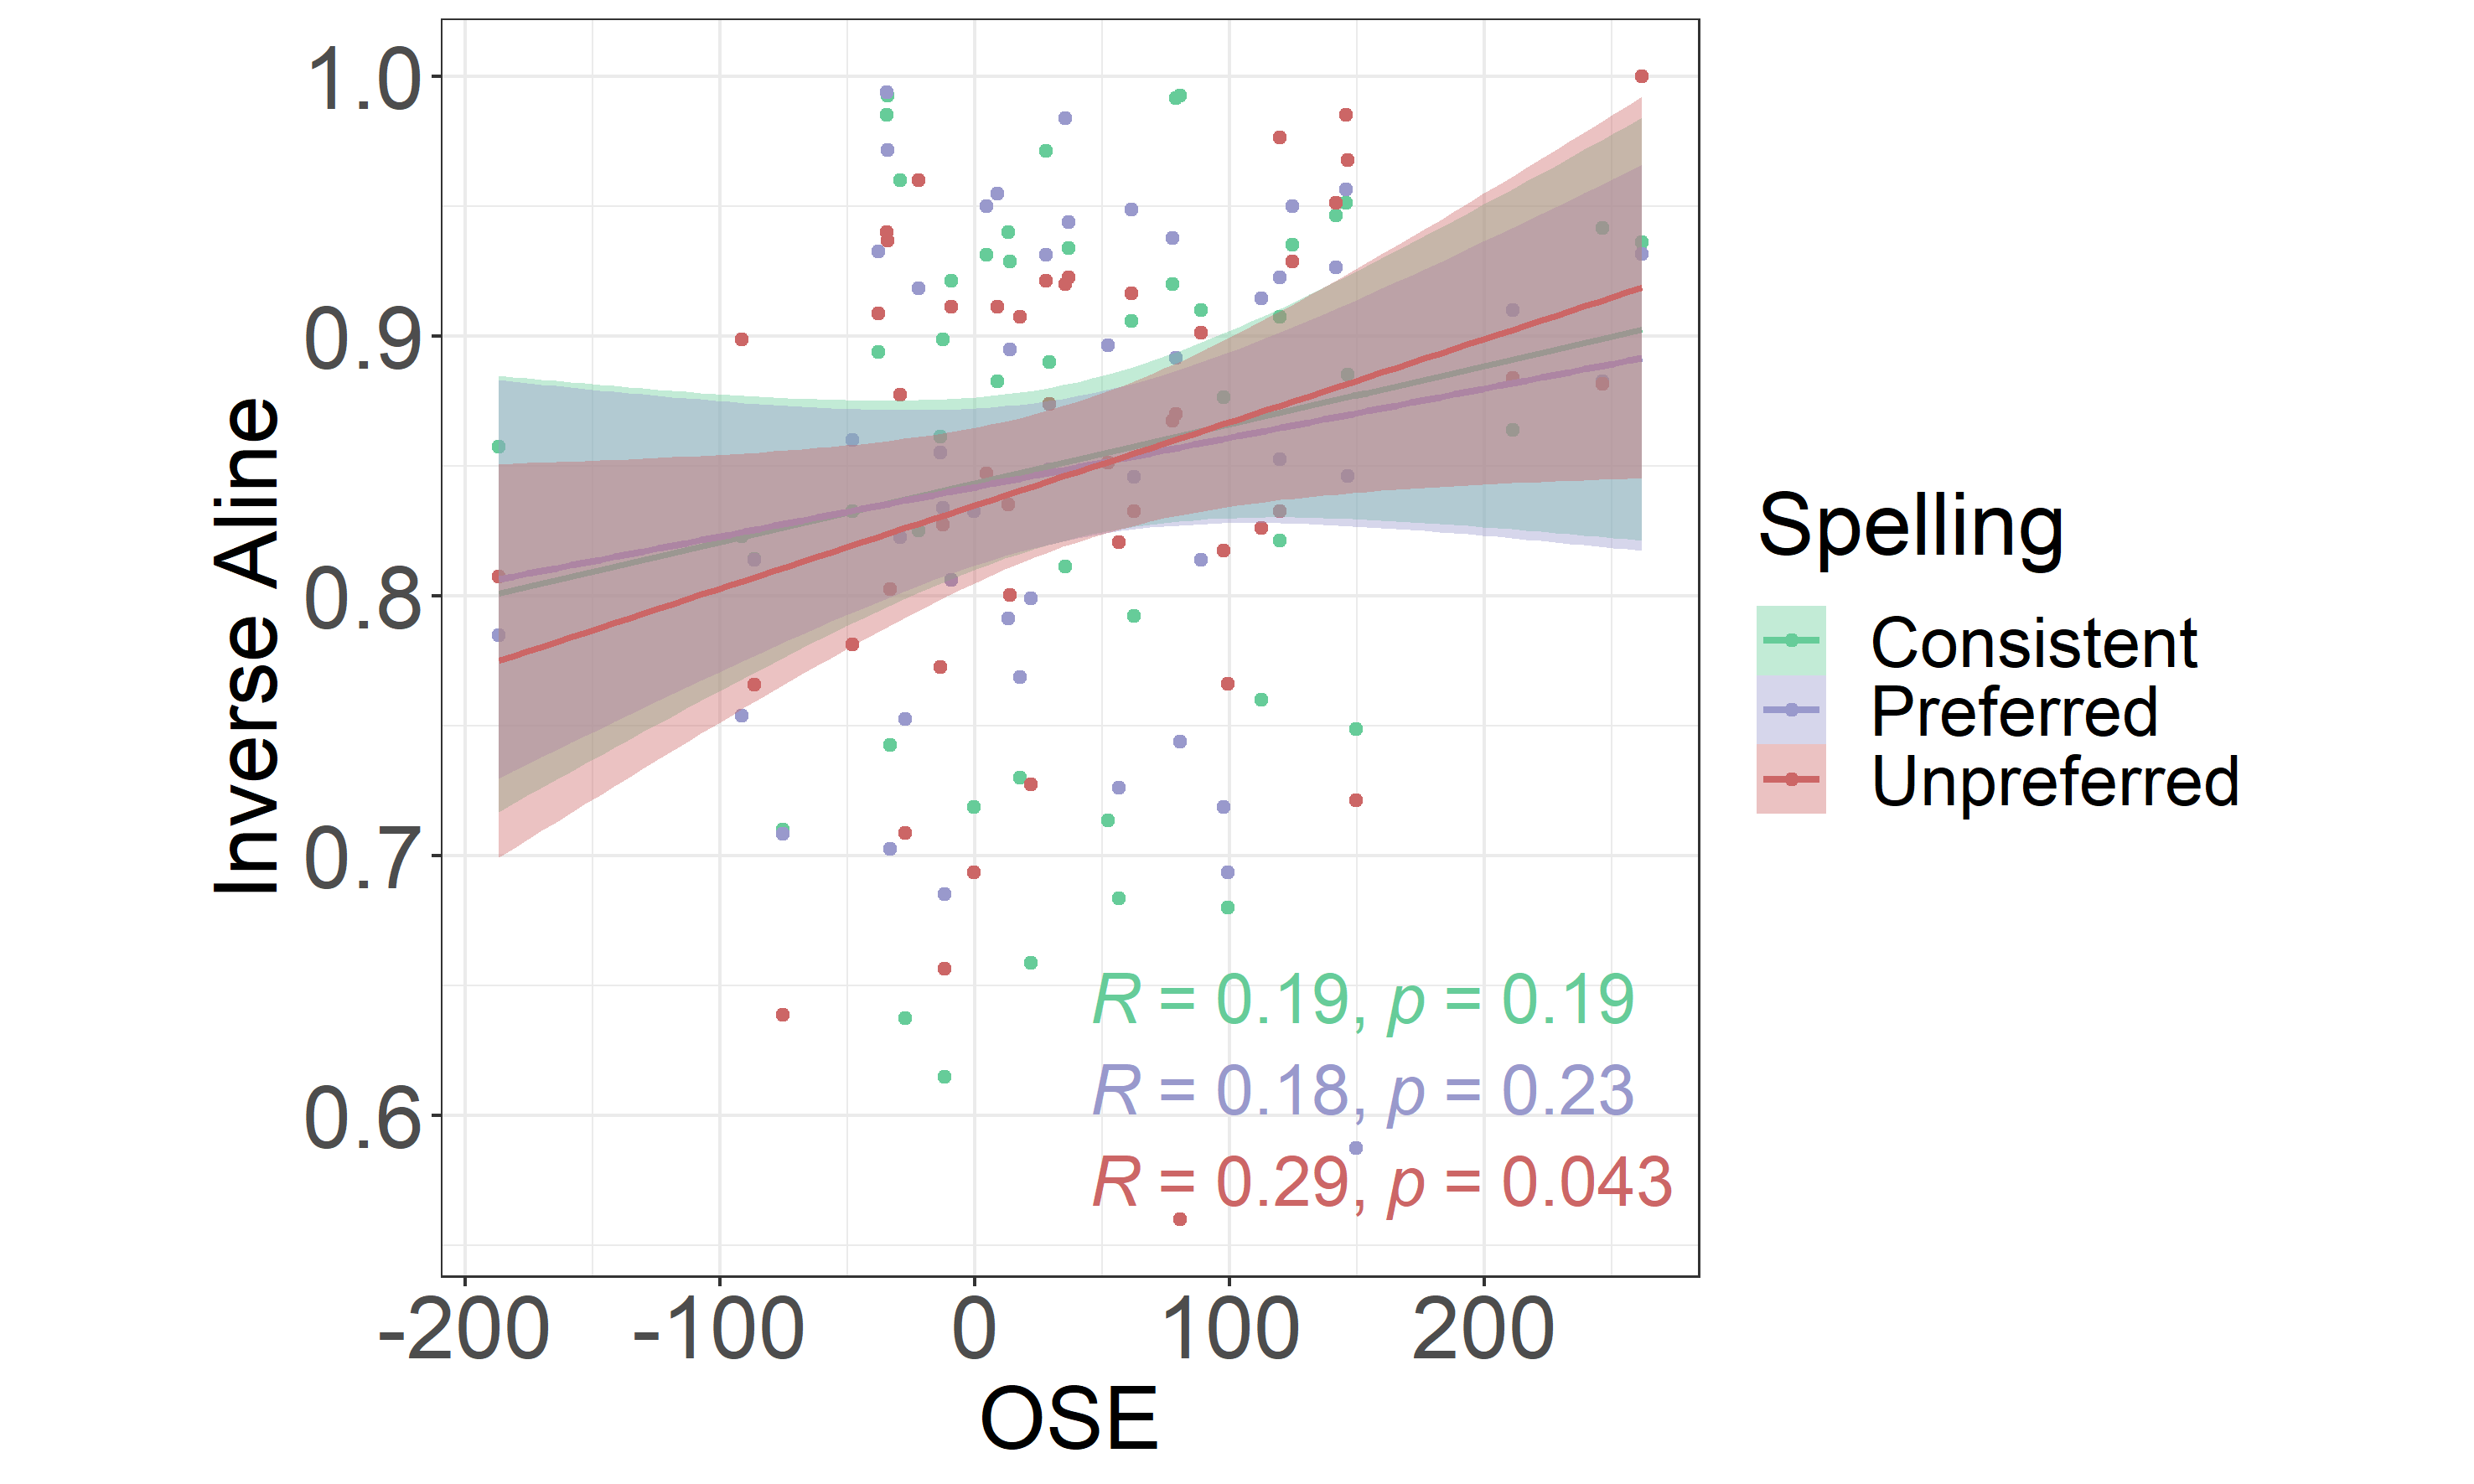 Correlation Between the OSE and Word Recall. The OSE (on the x-axis) operationalized as a difference in mean reaction times between the unpreferred and consistent spellings. The higher the value, the larger the effect. Analogously, higher inverse ALINE distance (y-axis) represents higher accuracy in recalling the names of the objects participants were trained on.